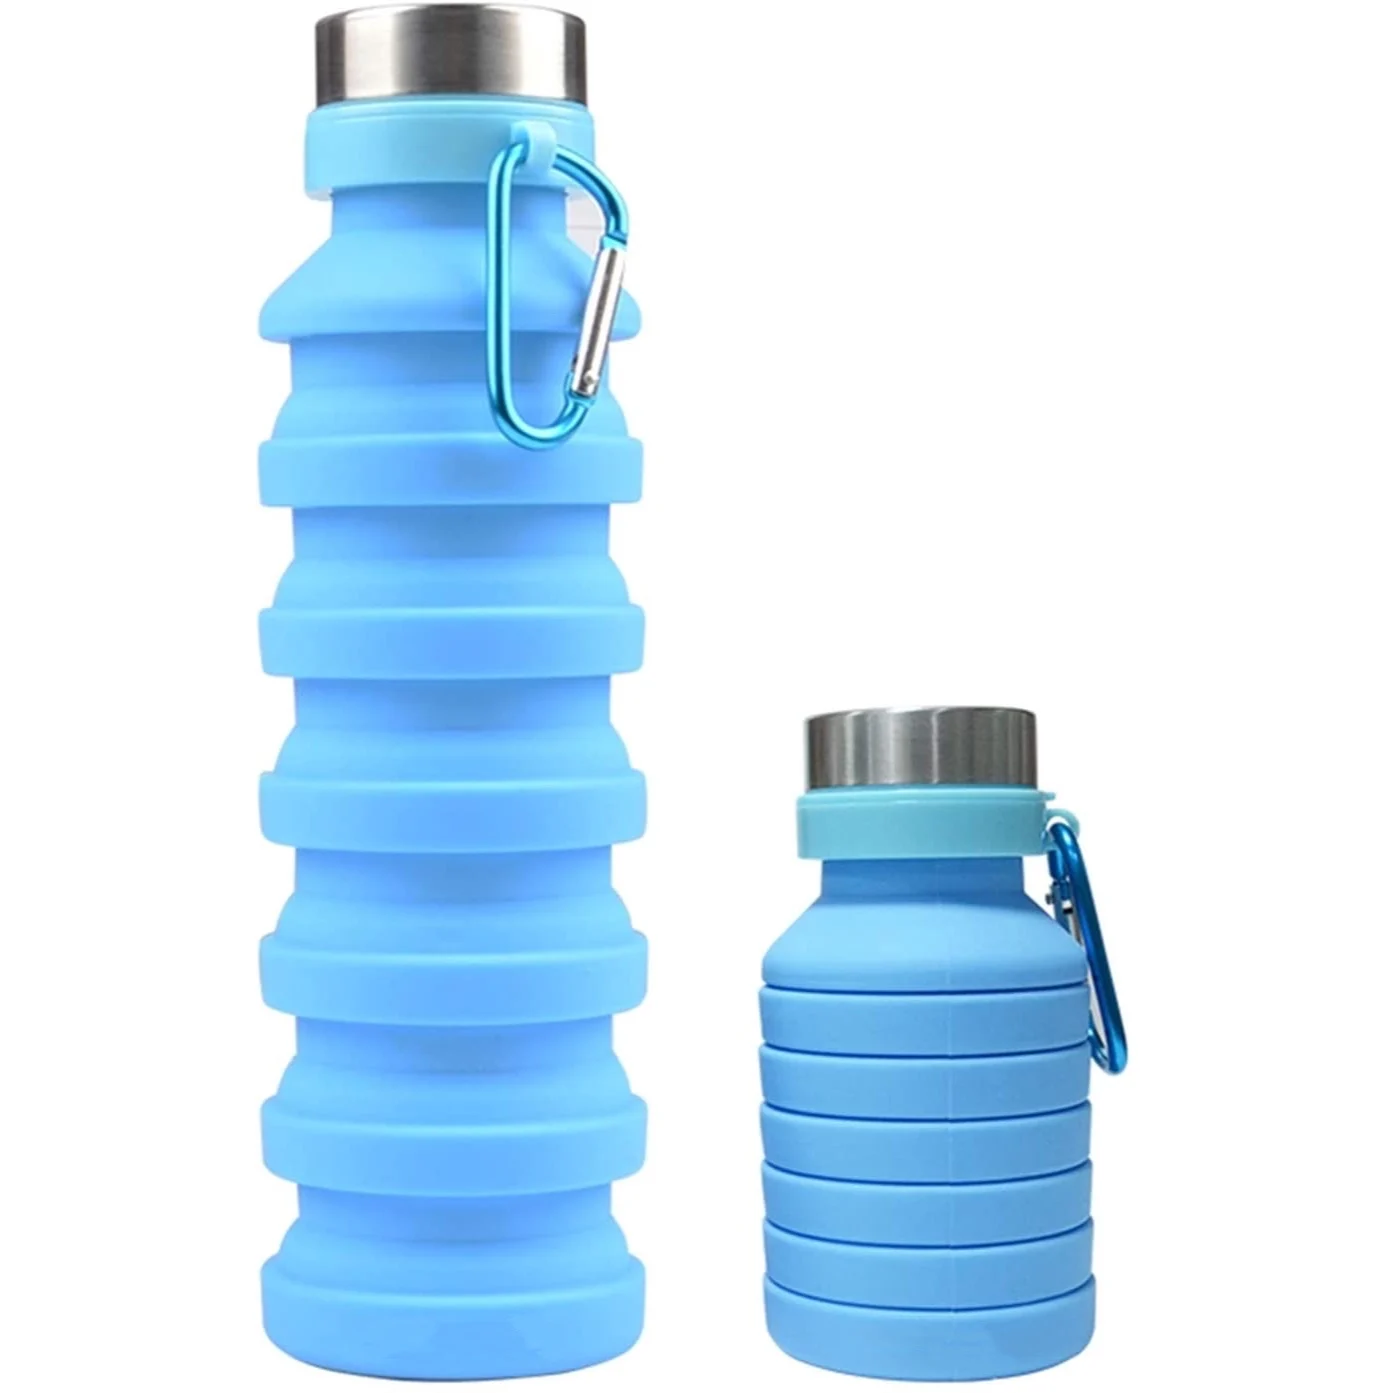 

550ML Collapsible Water Bottle Reuseable BPA Free Silicone Foldable Water Bottles for Travel Gym Camping Hiking